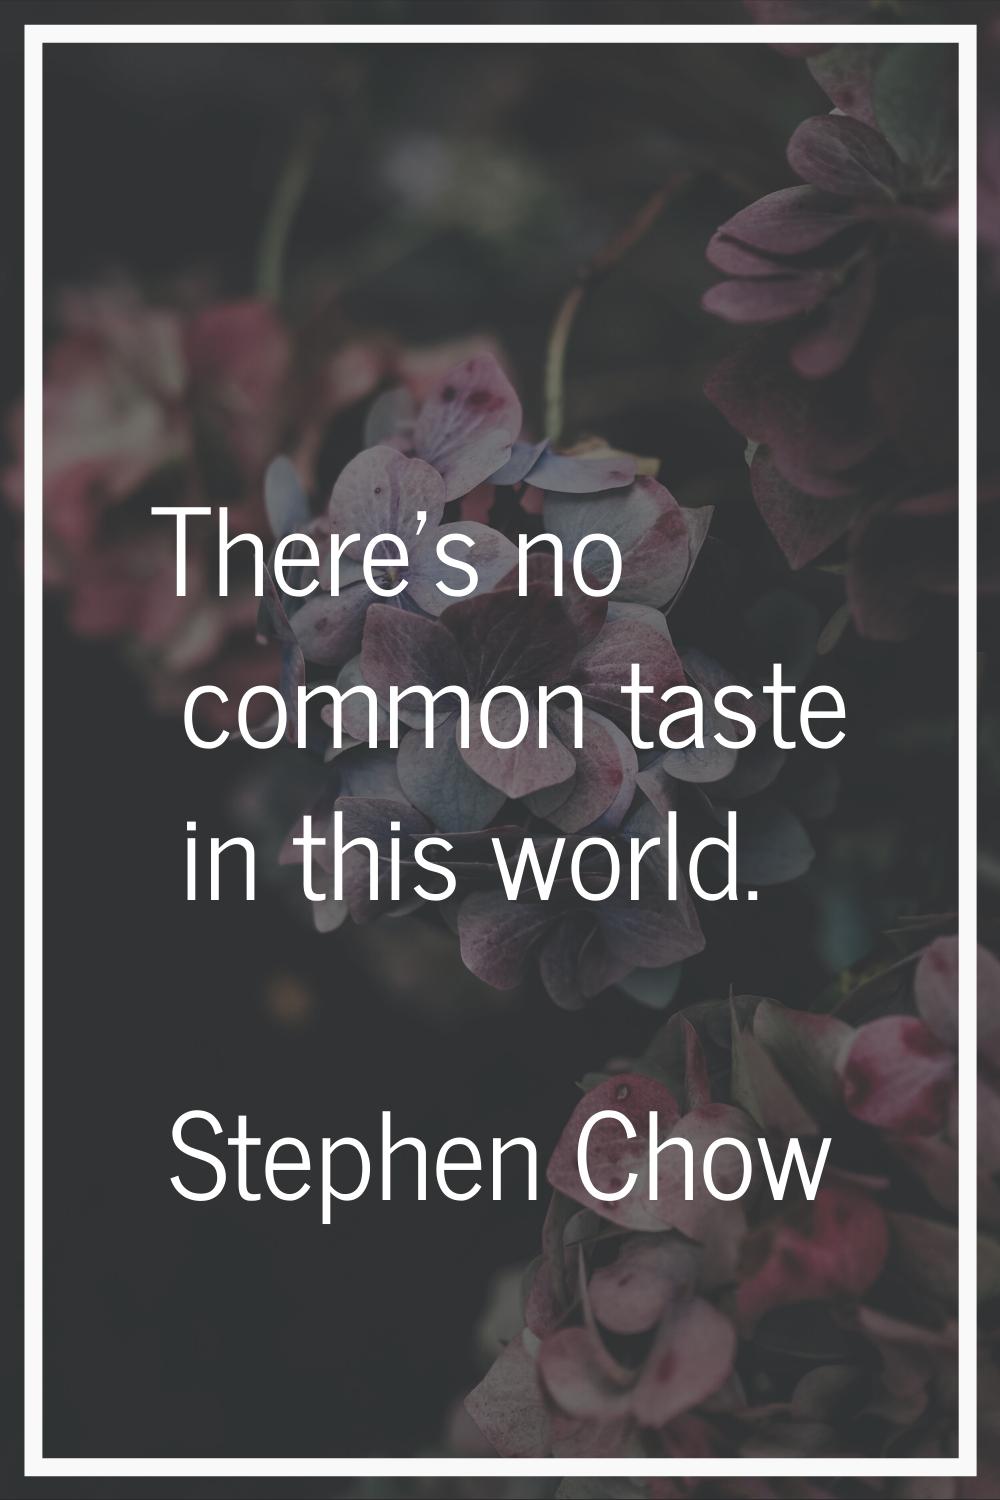 There's no common taste in this world.